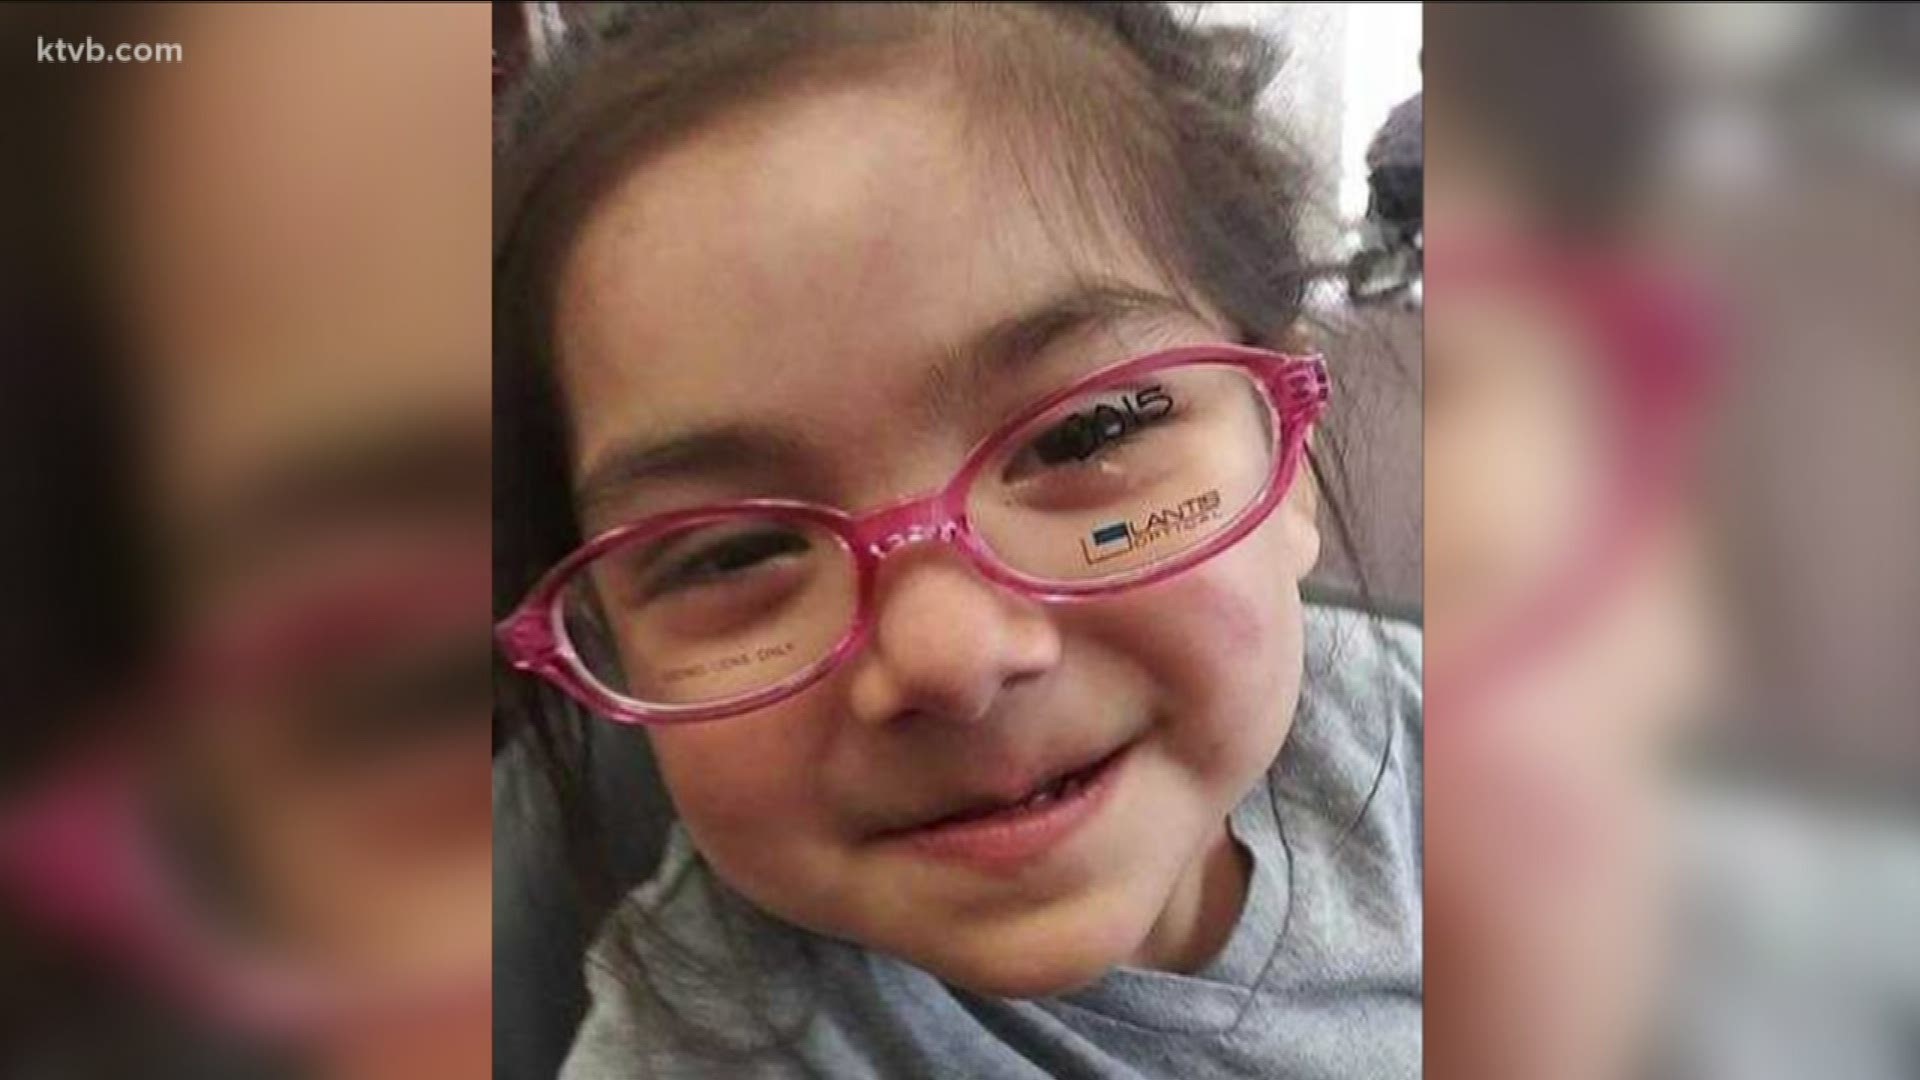 Odalys Rynee Chavez-Martinez, known by her nickname "NeyNey," died Monday from injuries she suffered in a crash a week earlier.